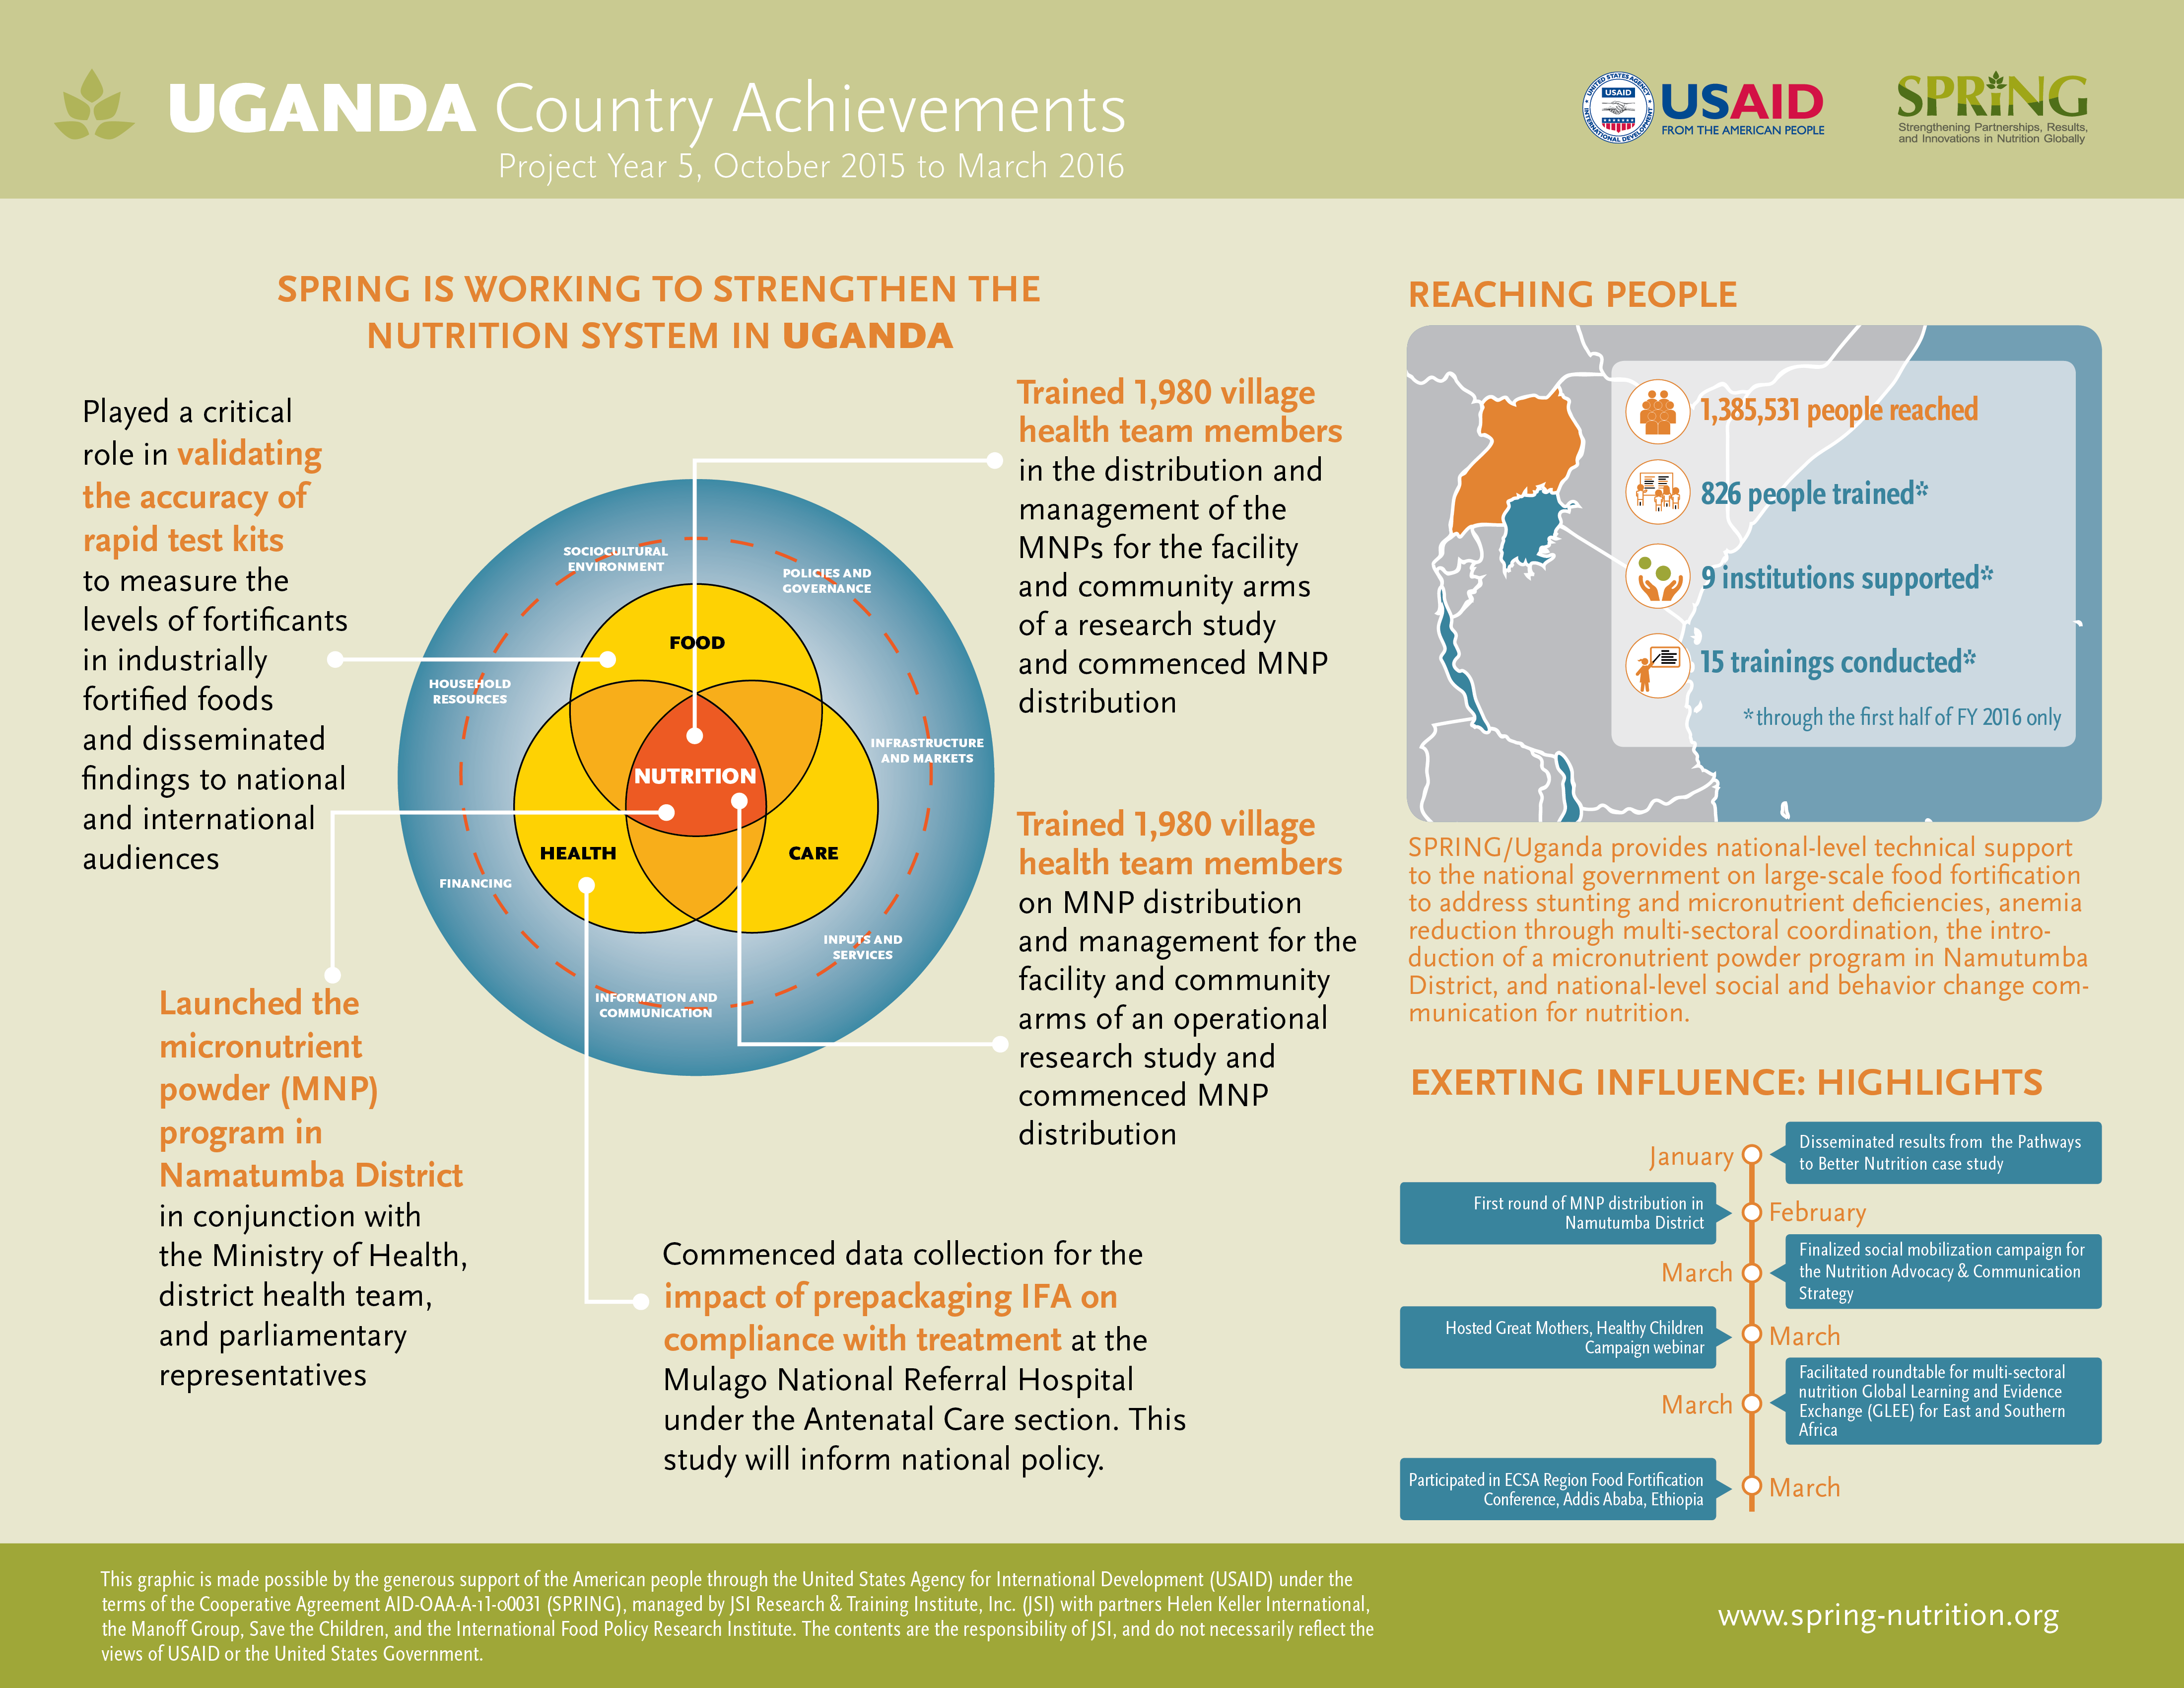 Uganda Country Achievements, Project Year 5, October 2015 to March 2016